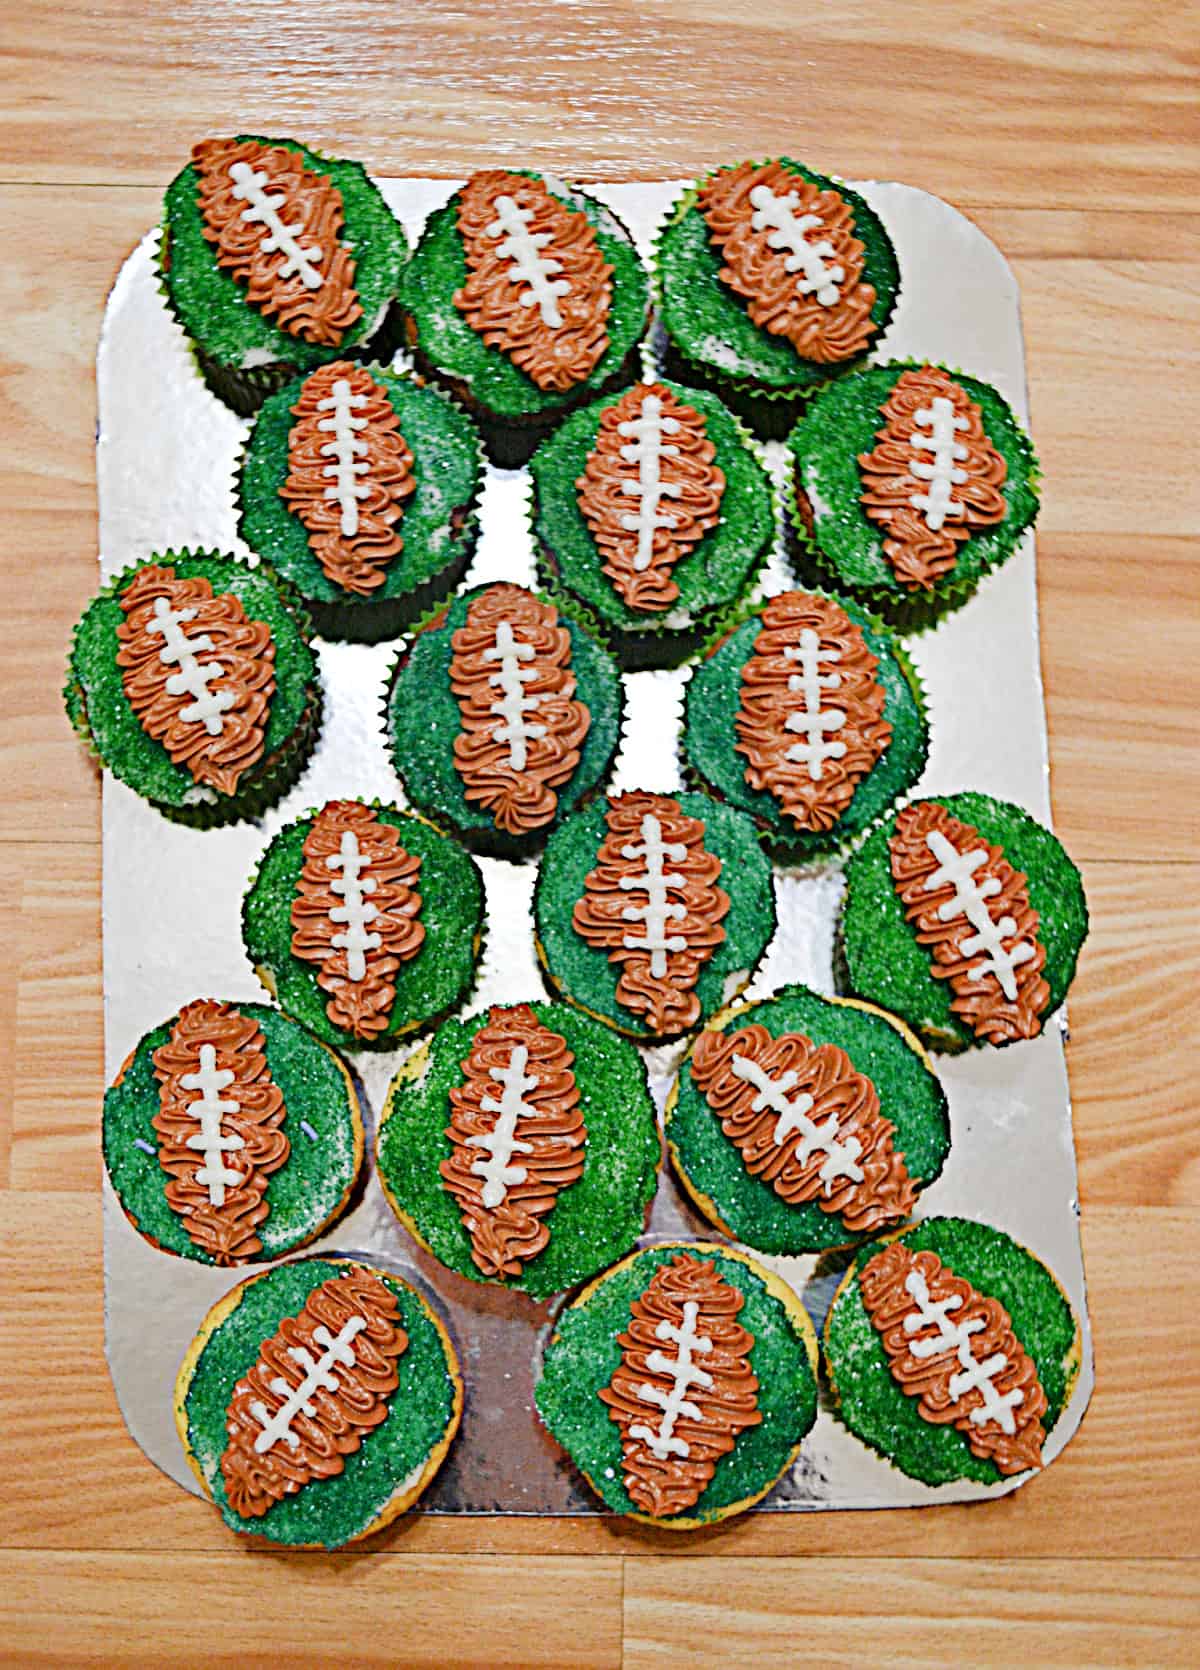  A platter with football cupcakes on it.